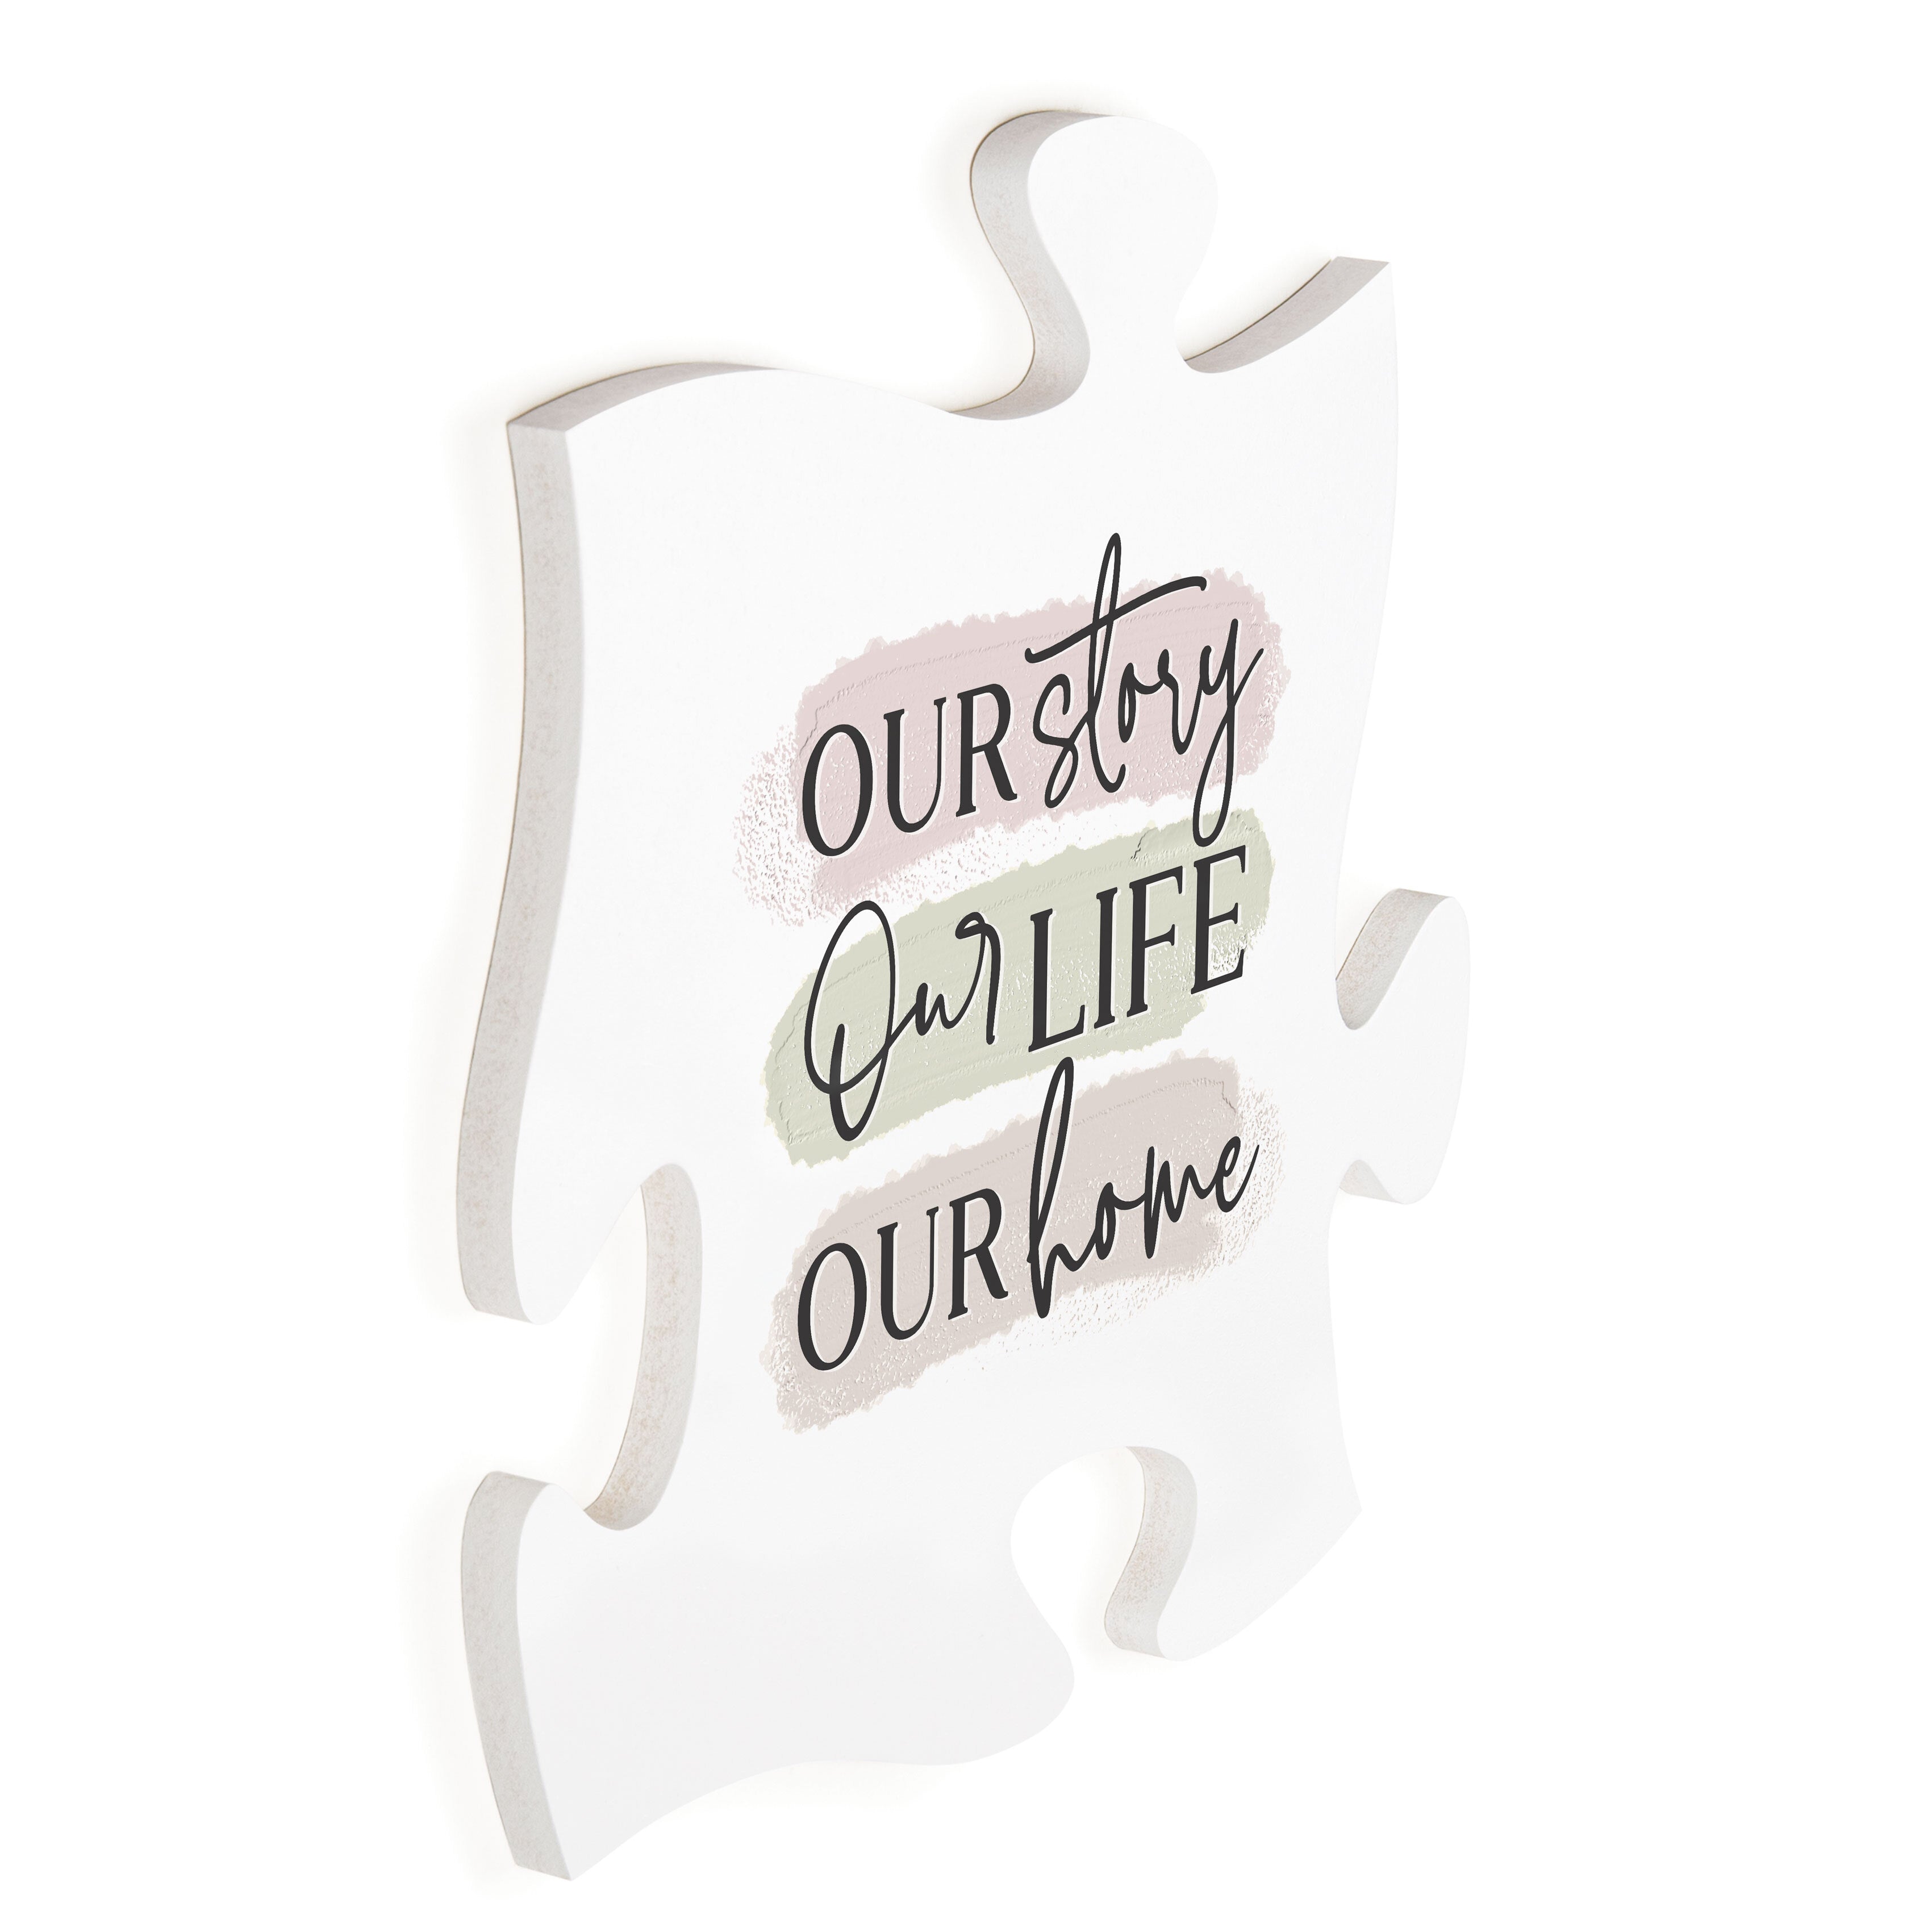 **Our Story Our Life Our Home Puzzle Piece Décor